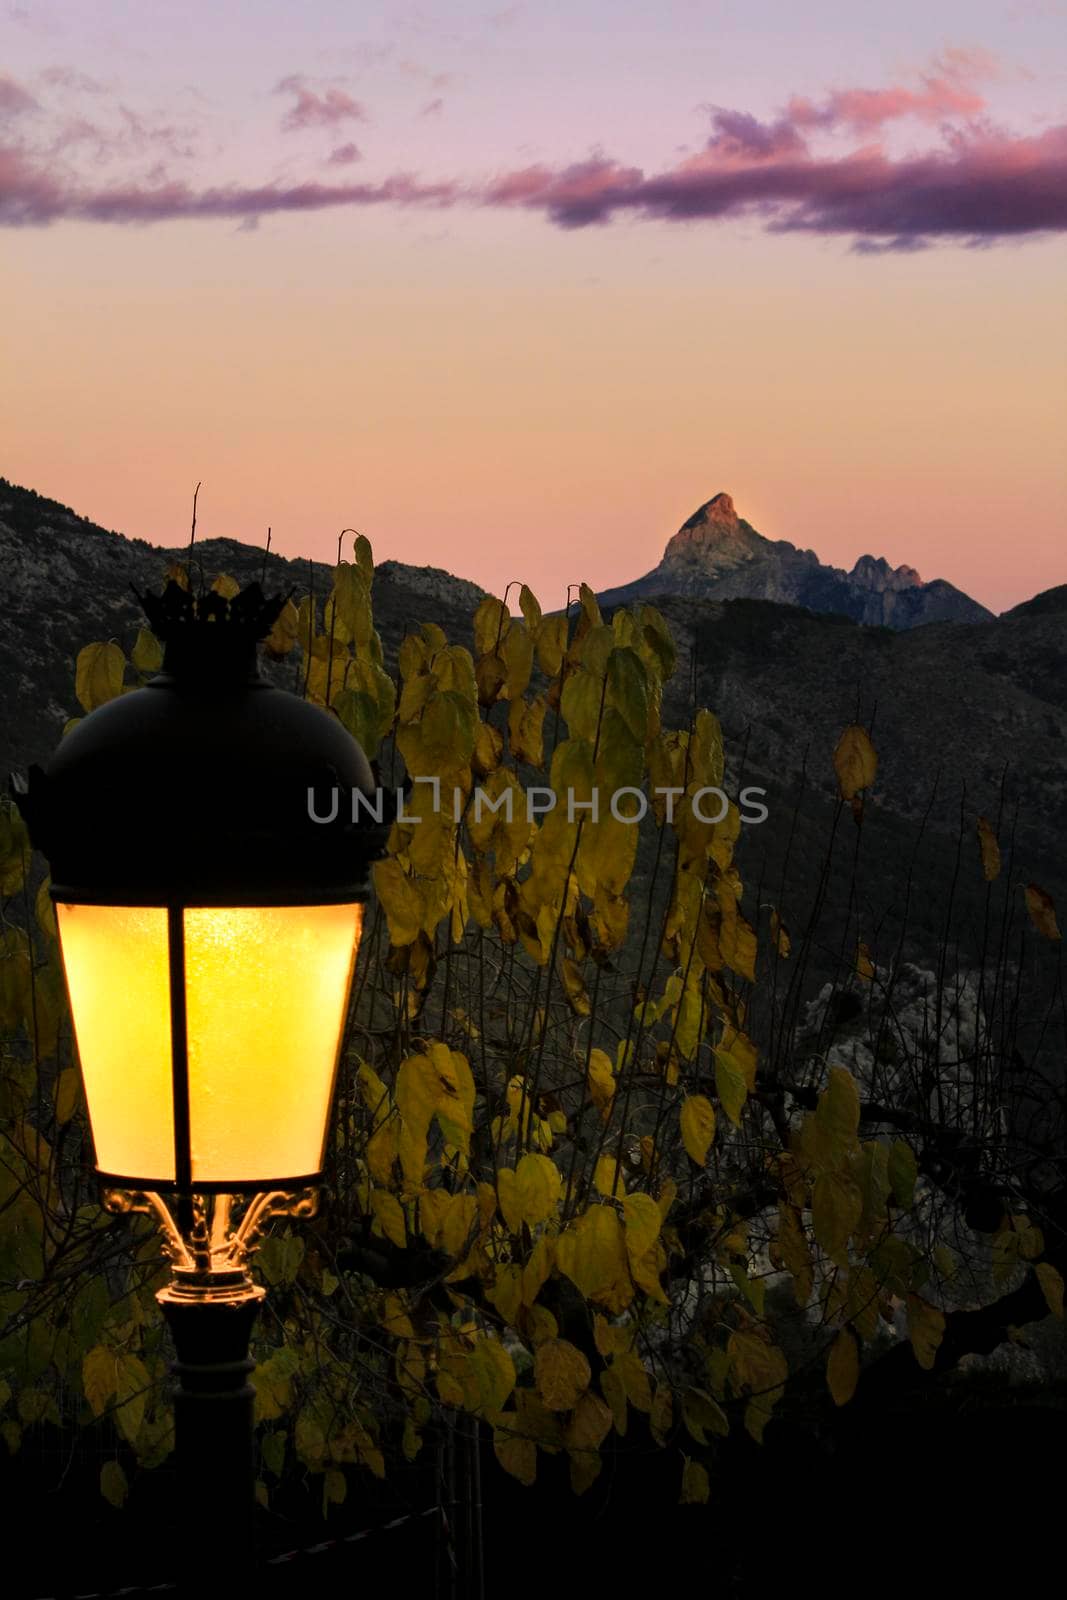 Sunset in Guadalest village with beautiful view of the valley by soniabonet